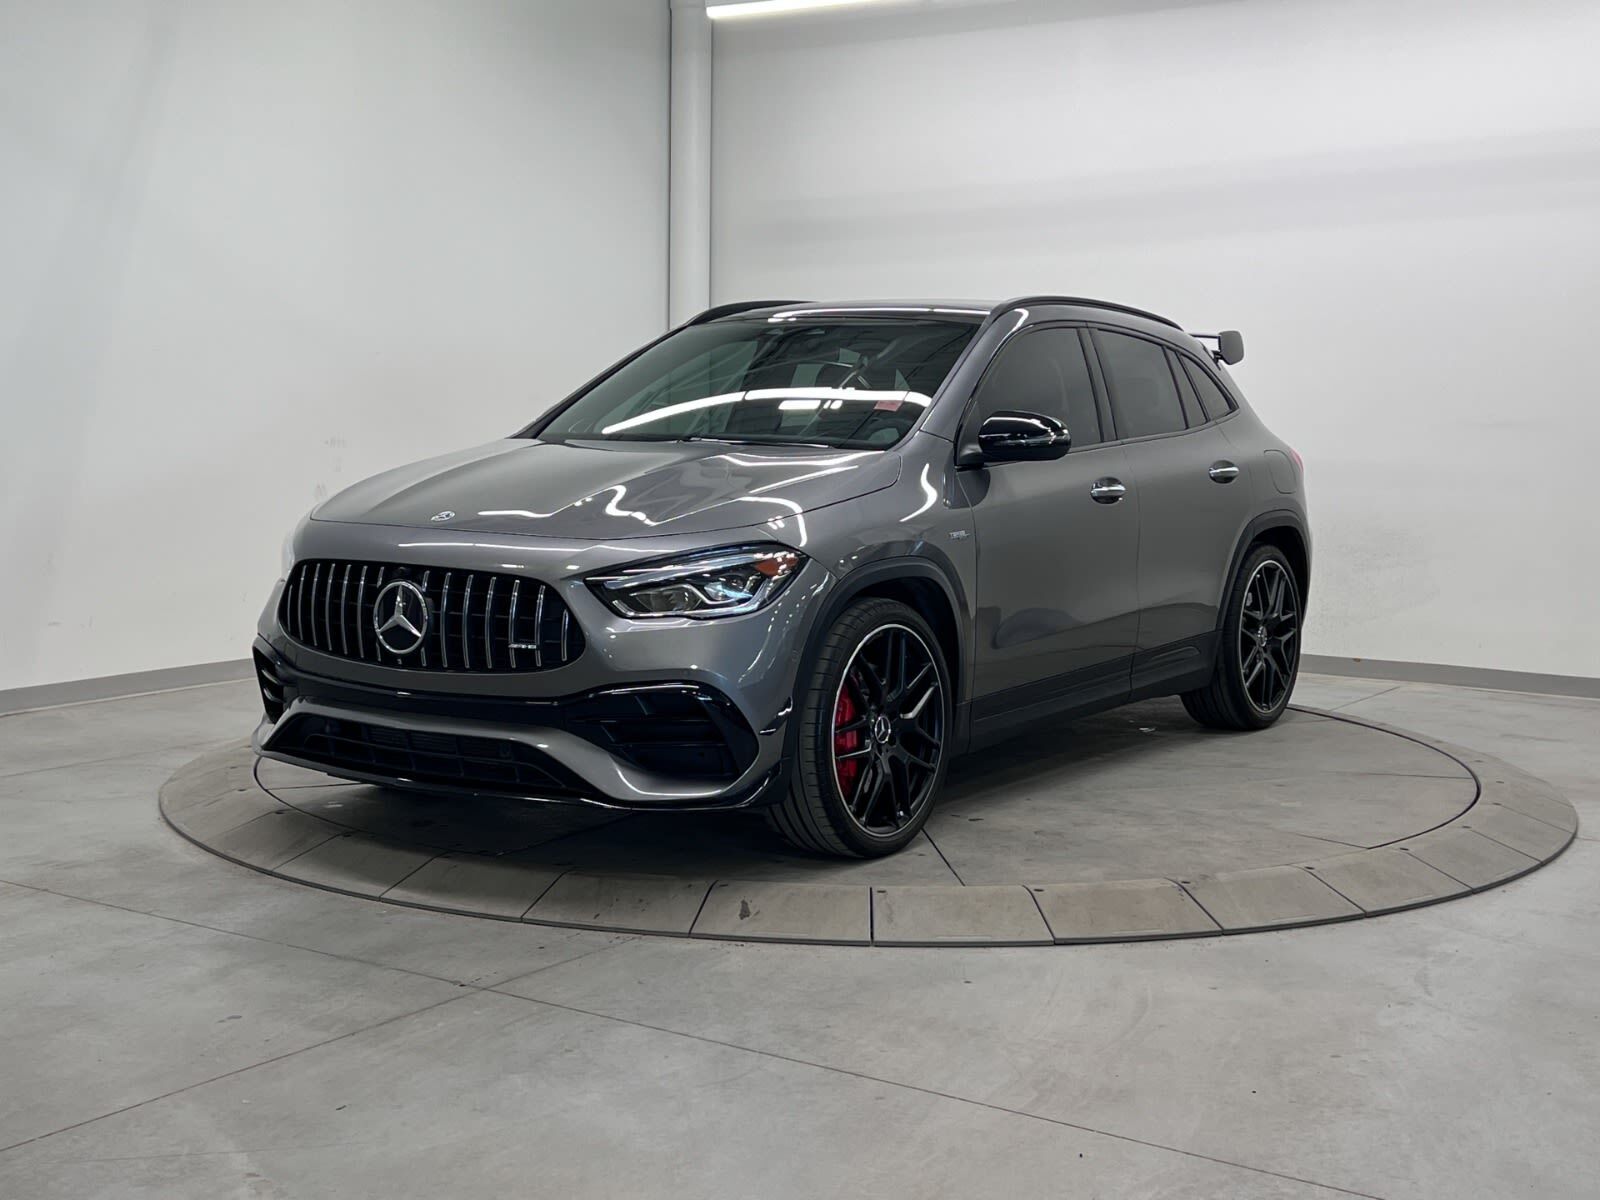 2021 Mercedes-Benz GLA 45 AMG - MARCH MADNESS!